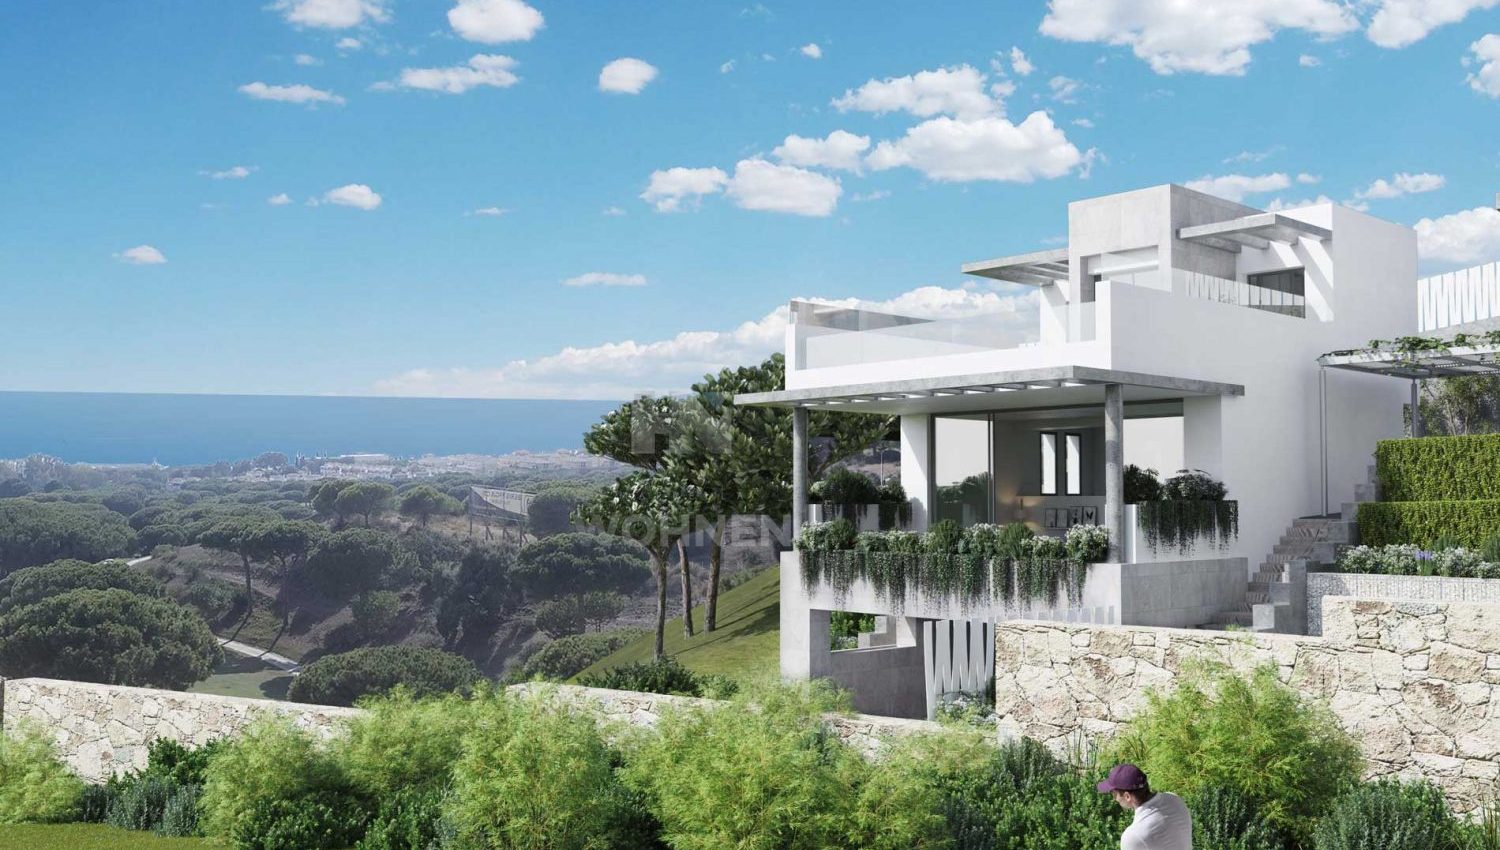 Frontline golf Townhouses with breathtaking views of the sea